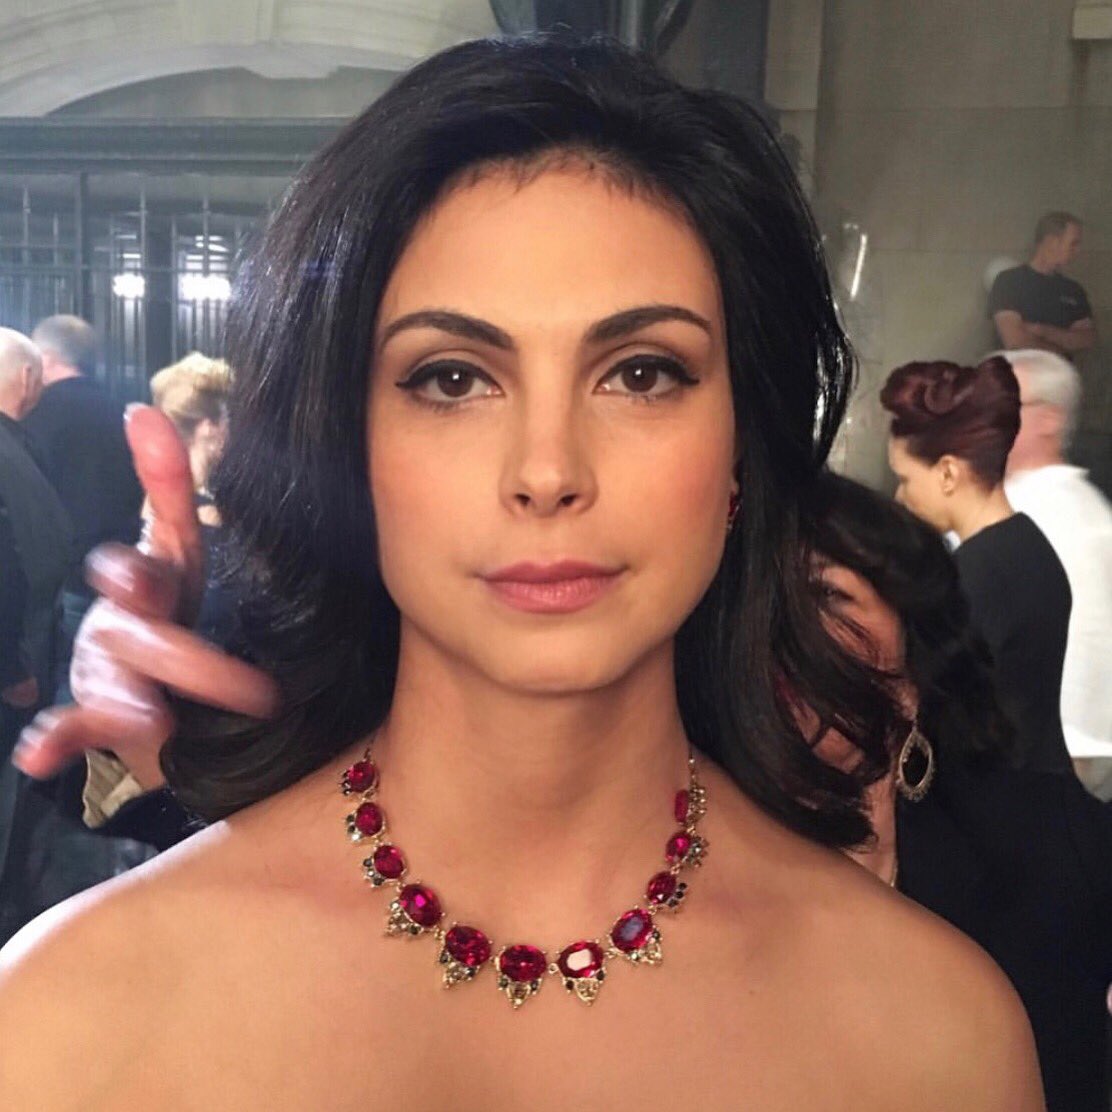 Morena Baccarin on Twitter: 